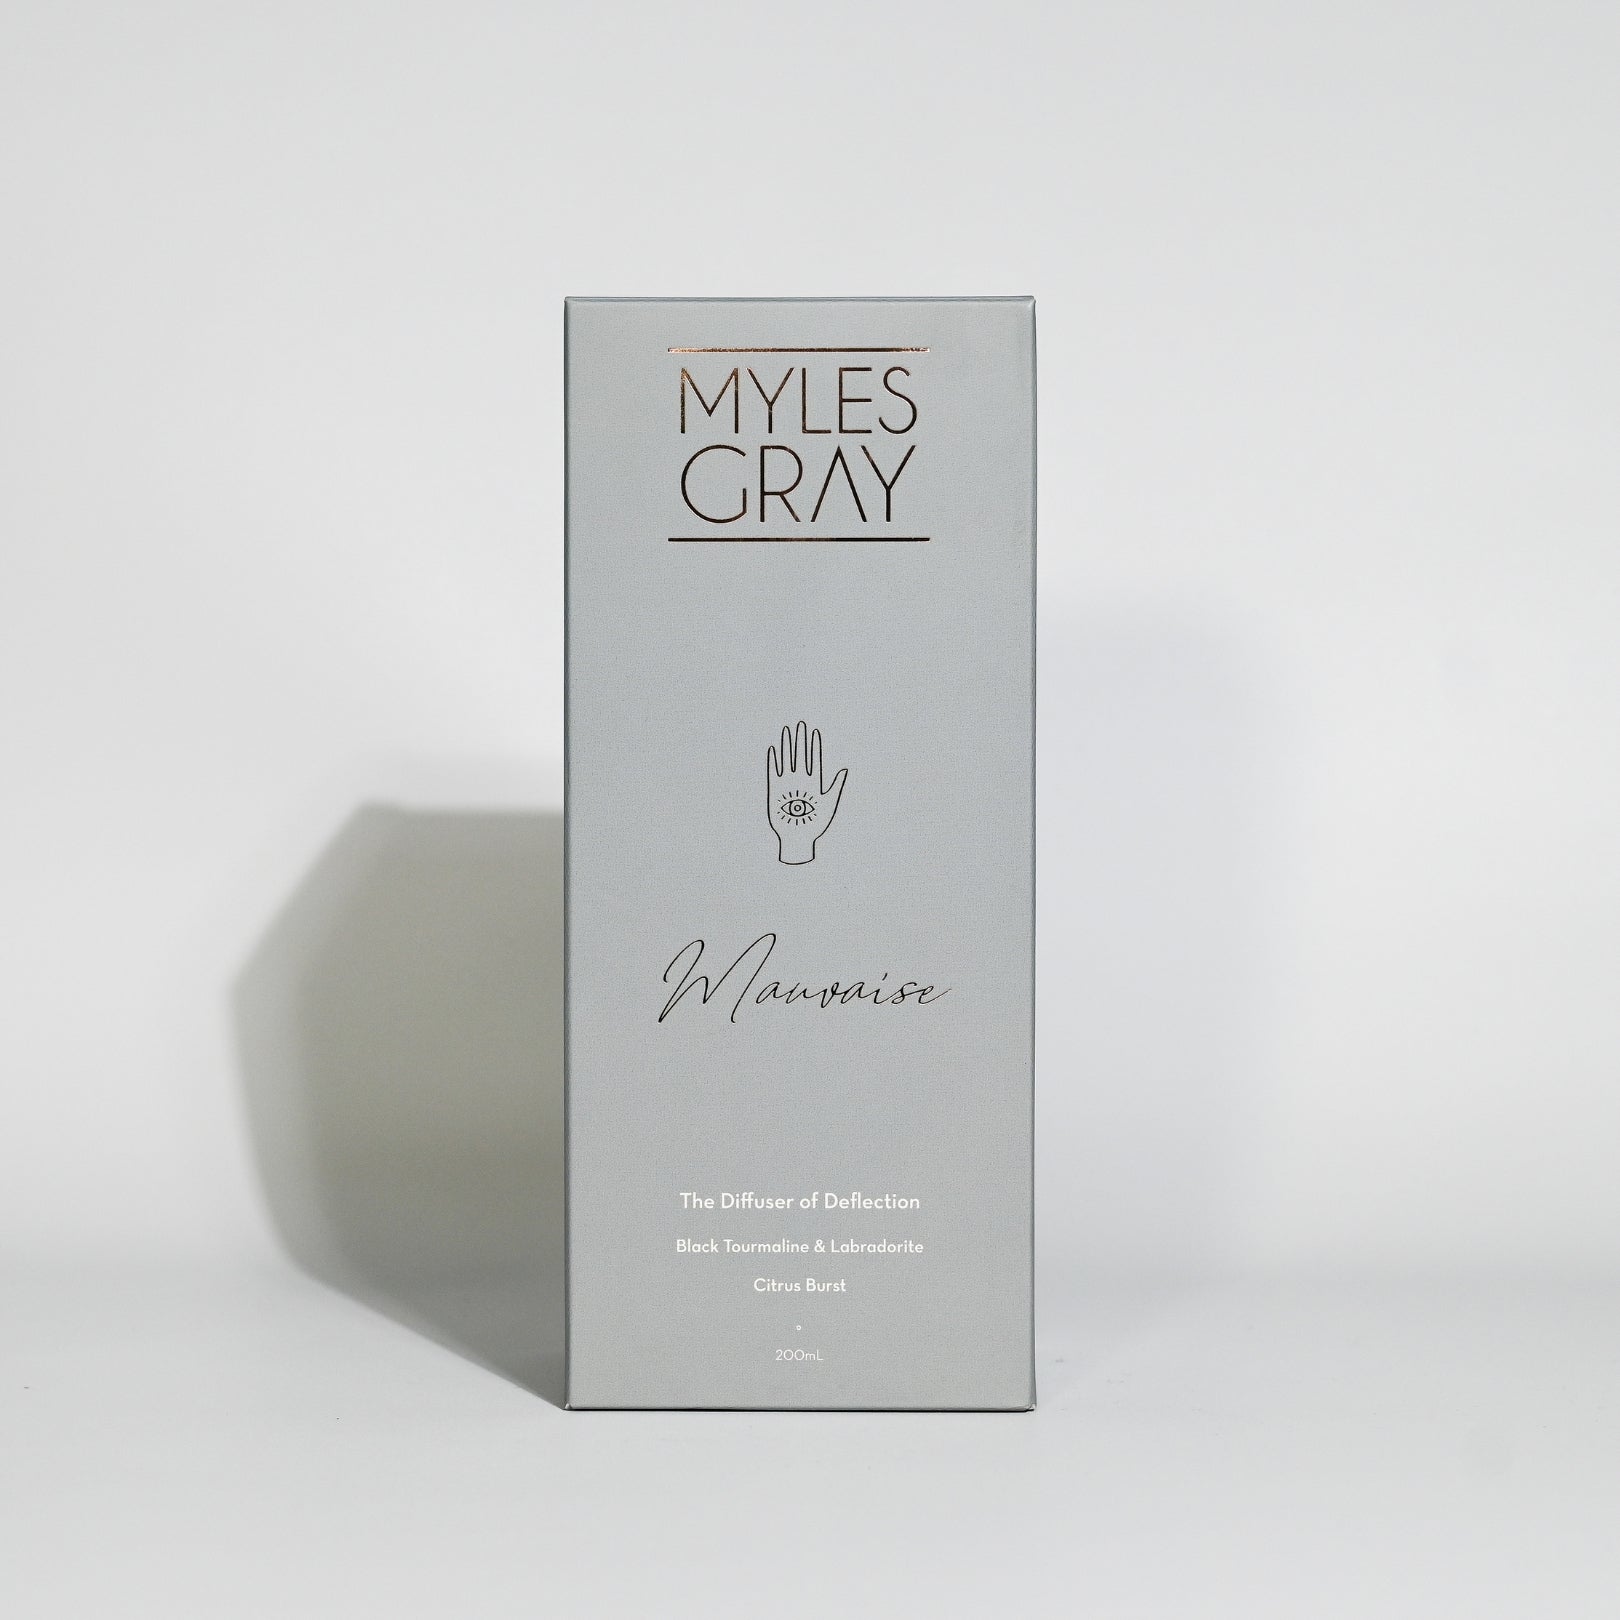 Mauvaise | The Diffuser of Deflection 250ml - Myles Gray